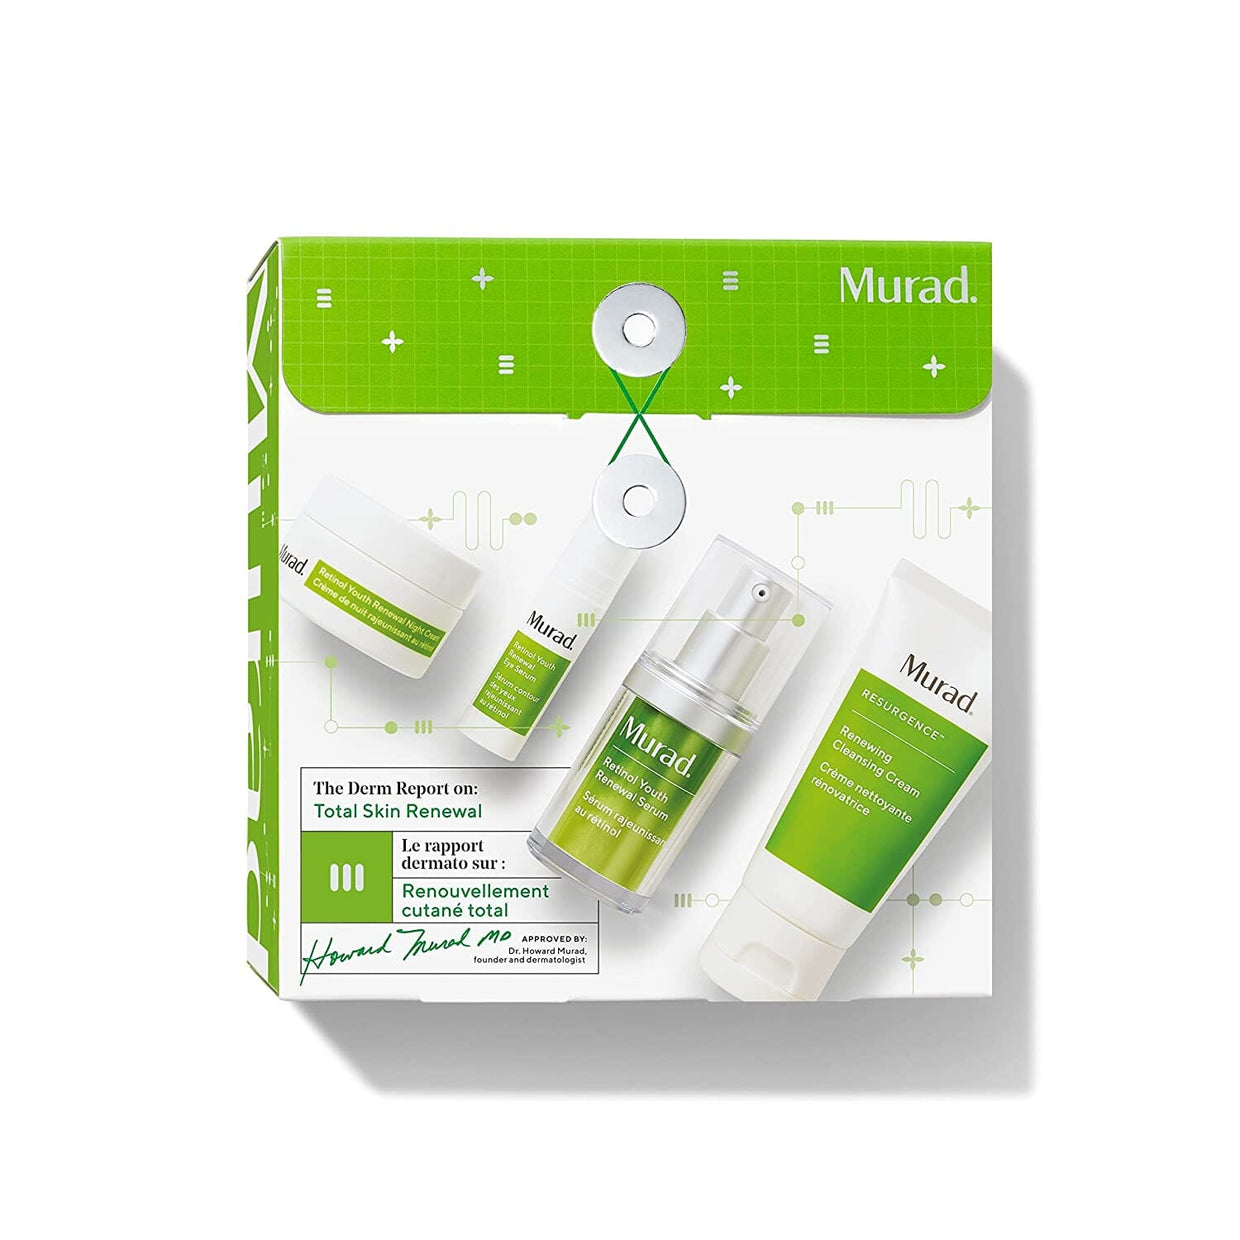 Murad The Derm Report on: Total Skin Renewal Set Murad Shop at Exclusive Beauty Club